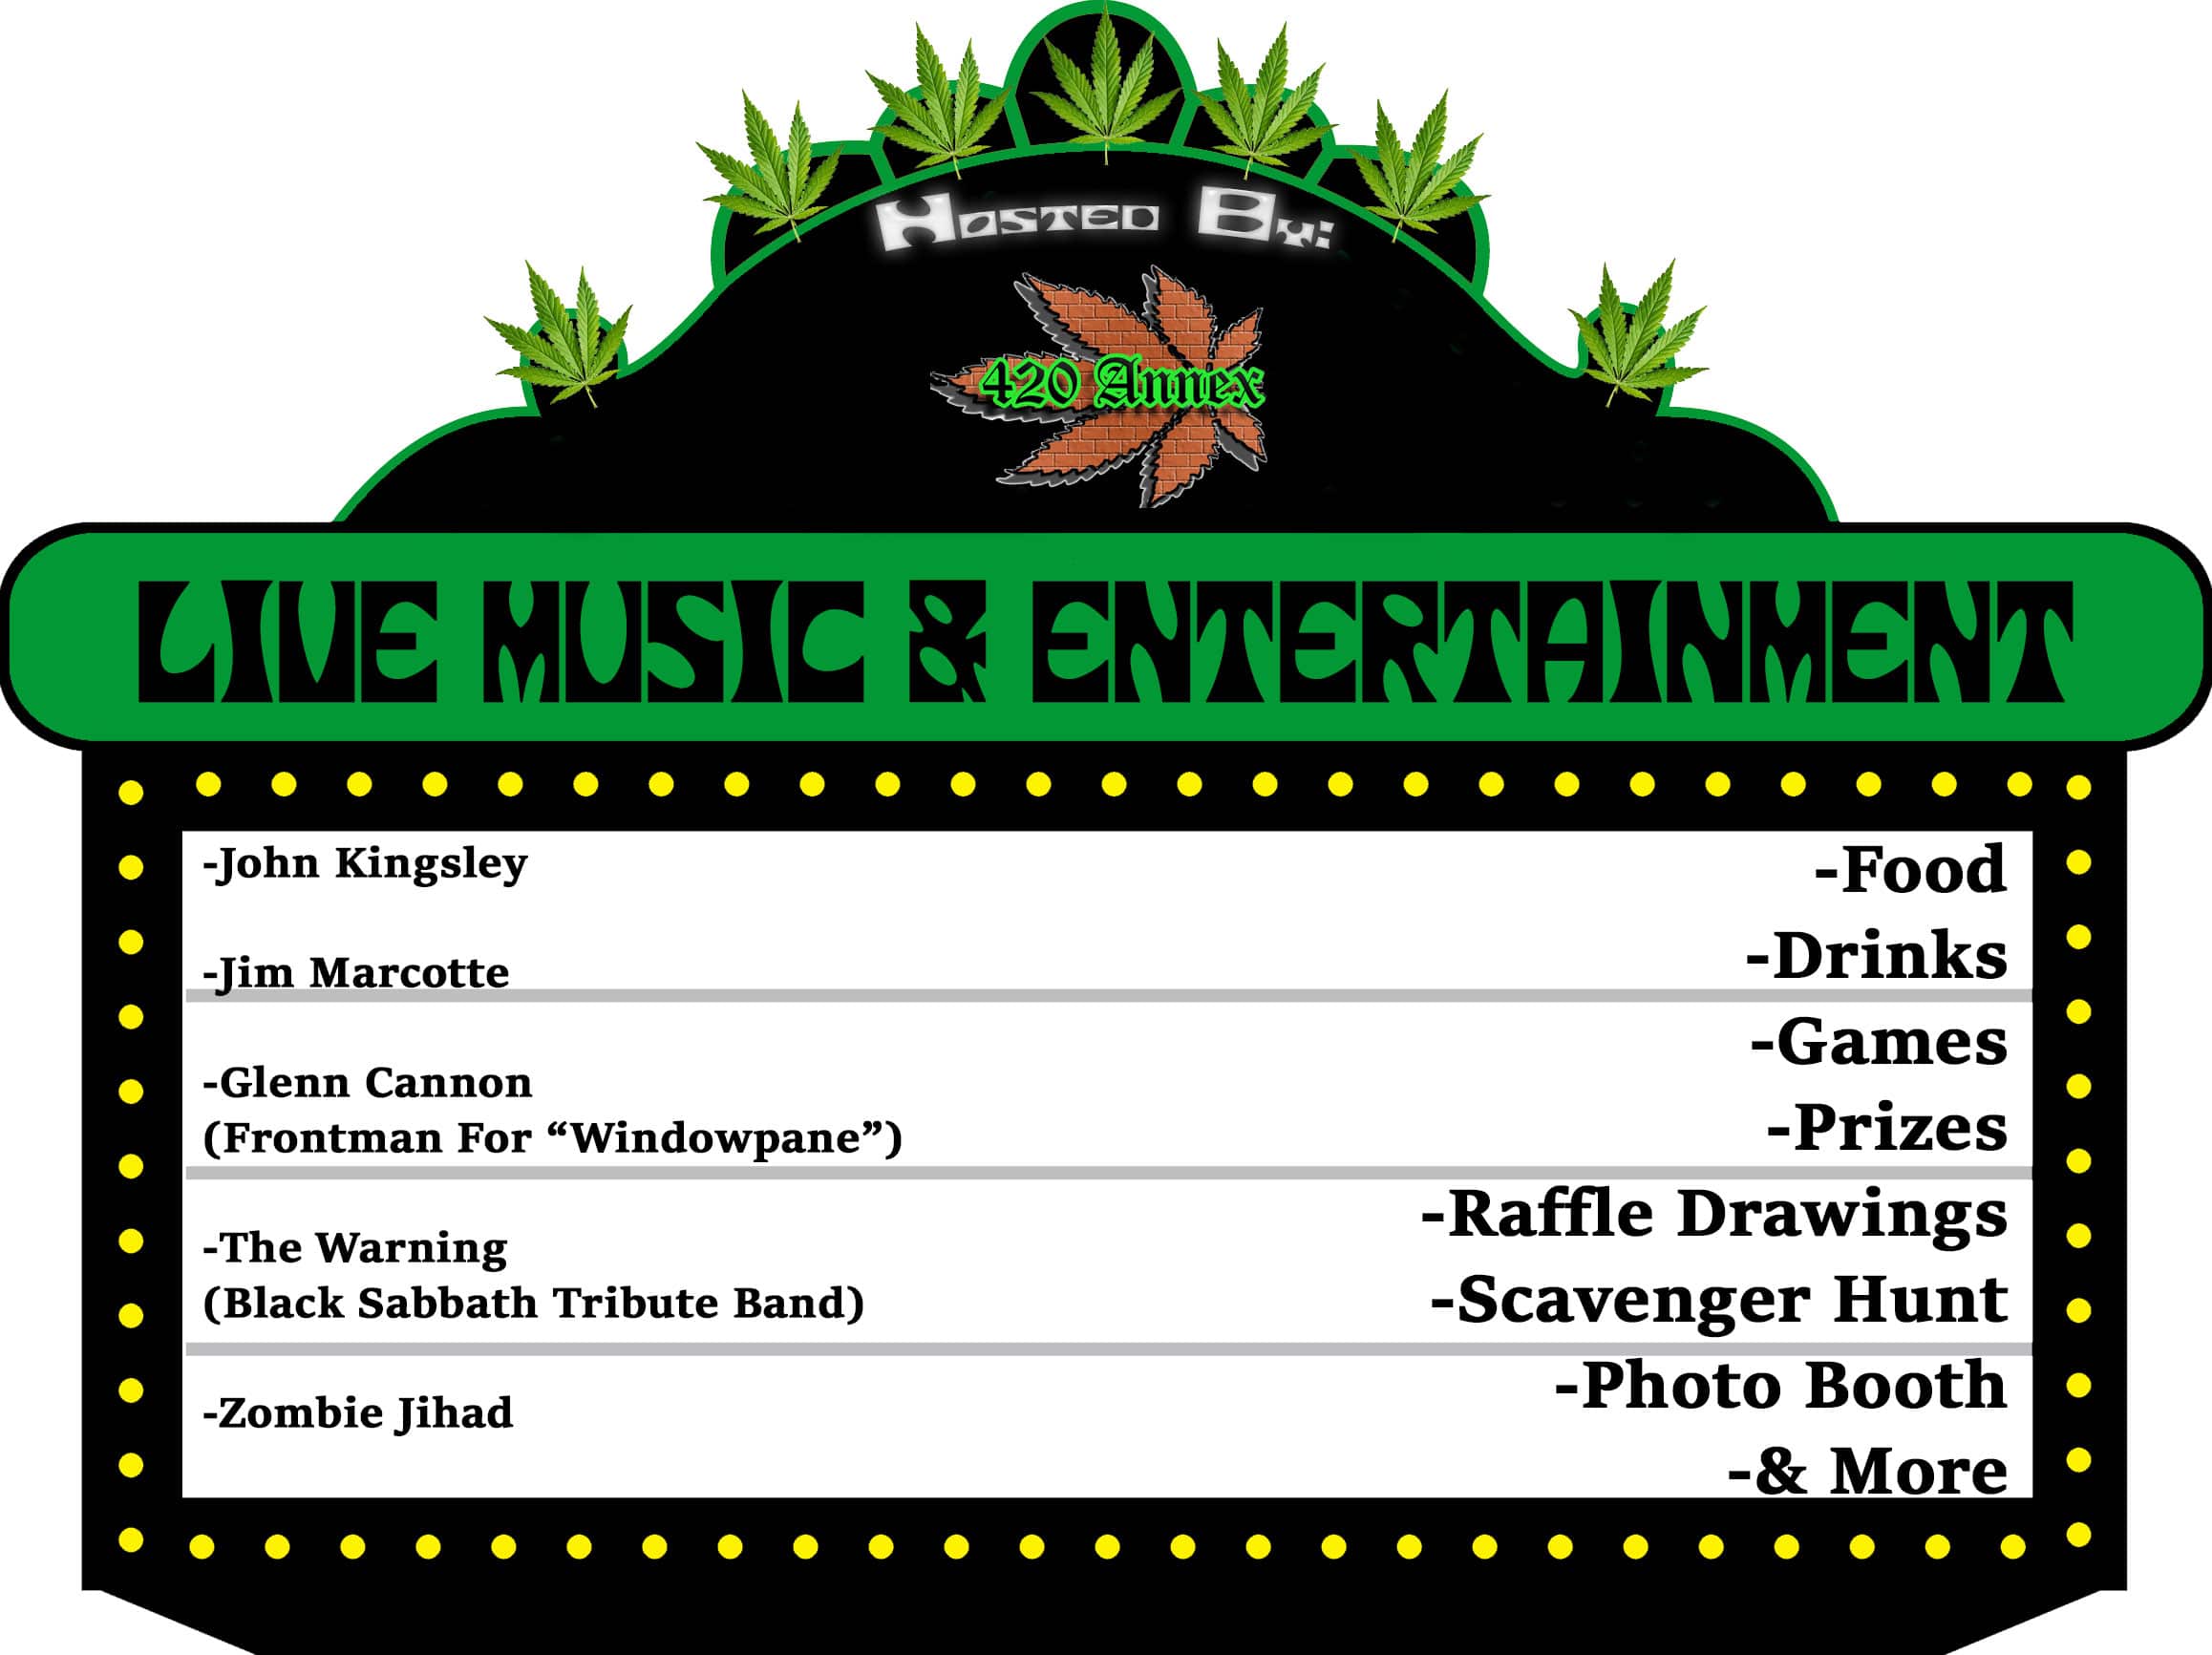 The 420 Annex’s 2019 4/20 Fair is the biggest and best Kitsap Cannabis Community event in our area of Washington! The 4/20 Fair will have lots of entertainment such as live music, food, drinks, games, prizes, raffle drawings, scavenger hunts, photo booths, and more. This event is free to attend. Join us and the rest of your Best Buds for this super fun International Cannabis Culture Holiday!